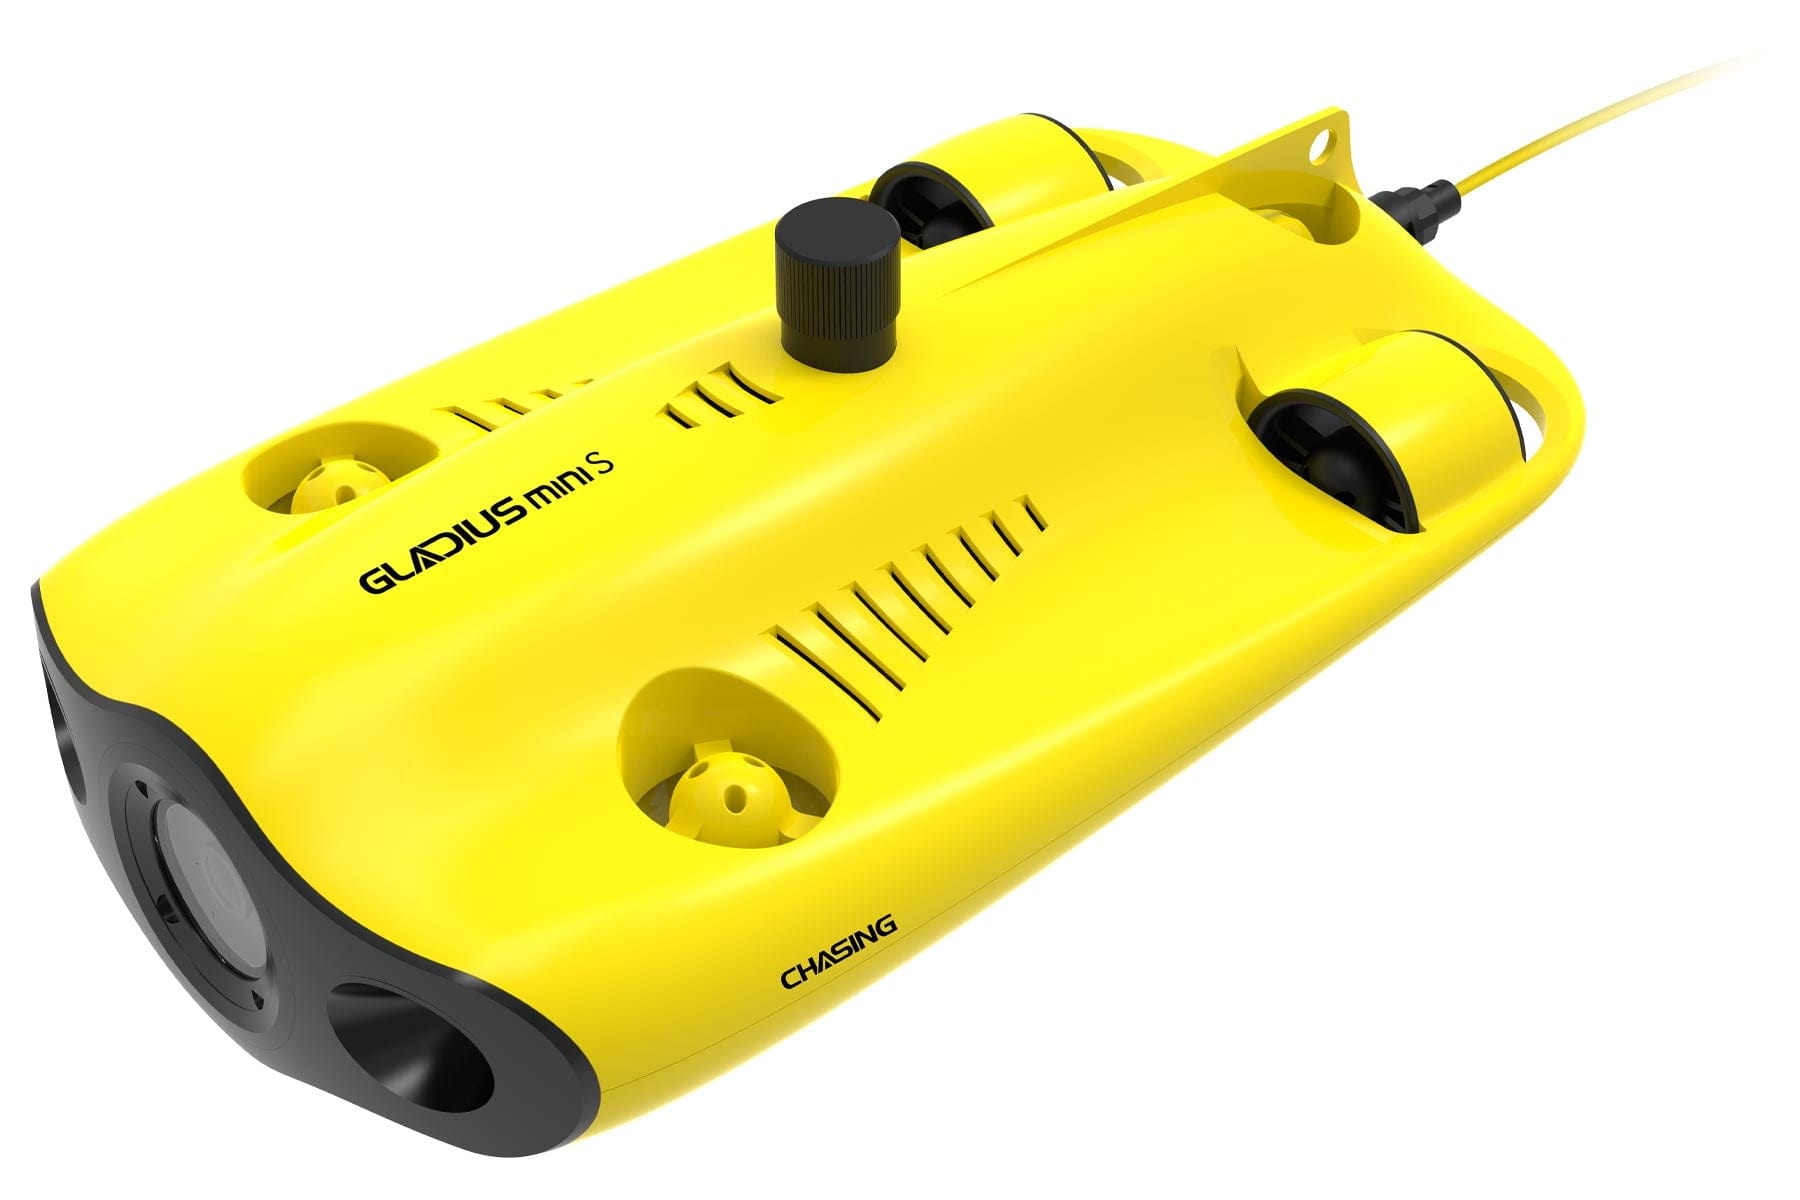 Chasing Gladius Mini S Submersible ROV Deluxe Flash Pack with 4K Video - RTR CHS40-30-400-0074